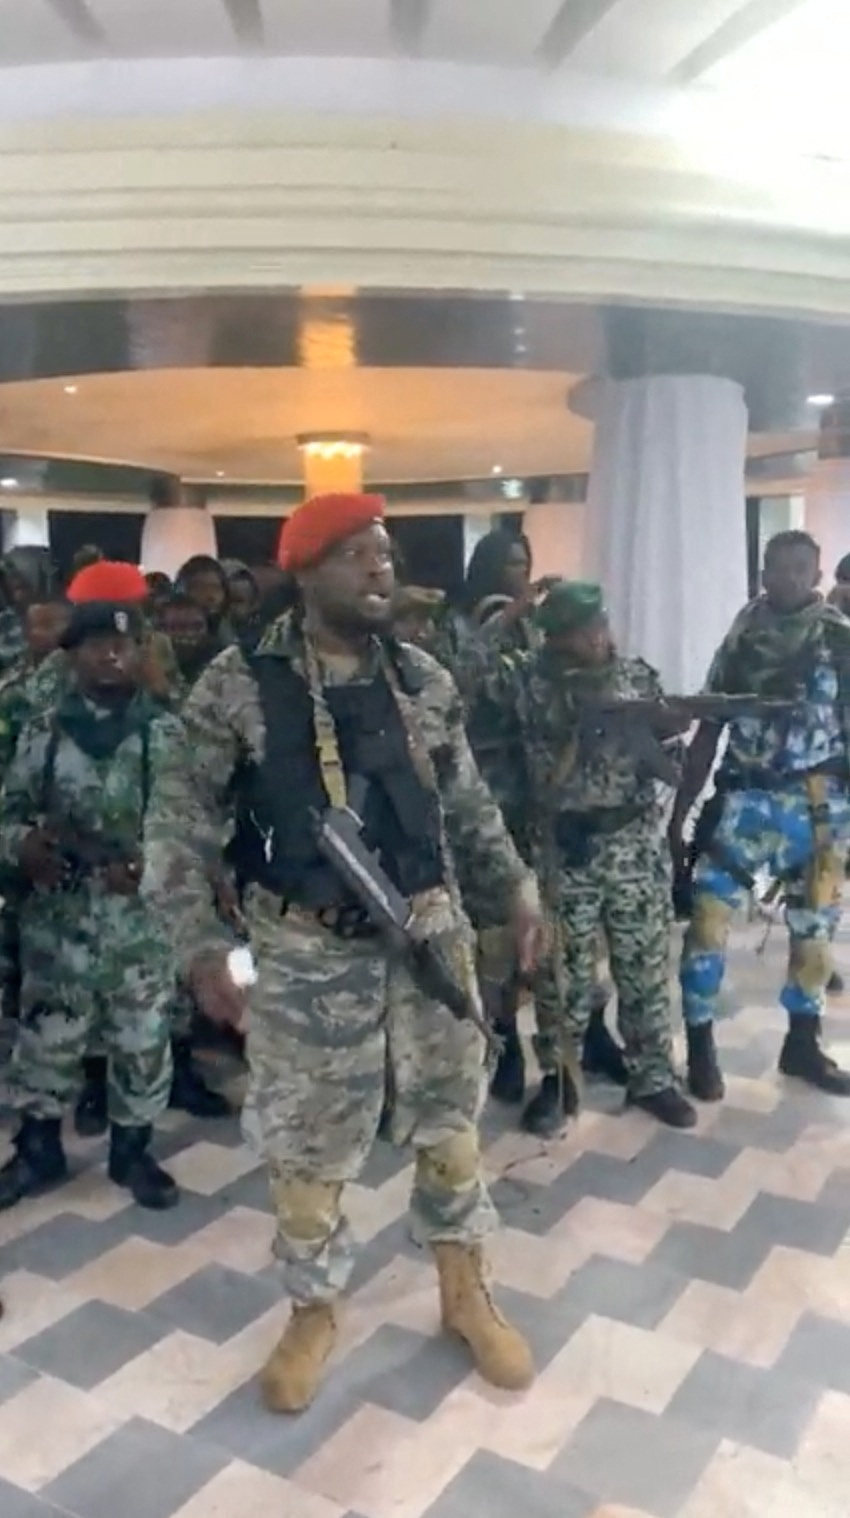 Men in military fatigues inside the Palace of the Nation during an attempted coup in Kinshasa, Democratic Republic of Congo. Photo: Christian Malanga via Reuters